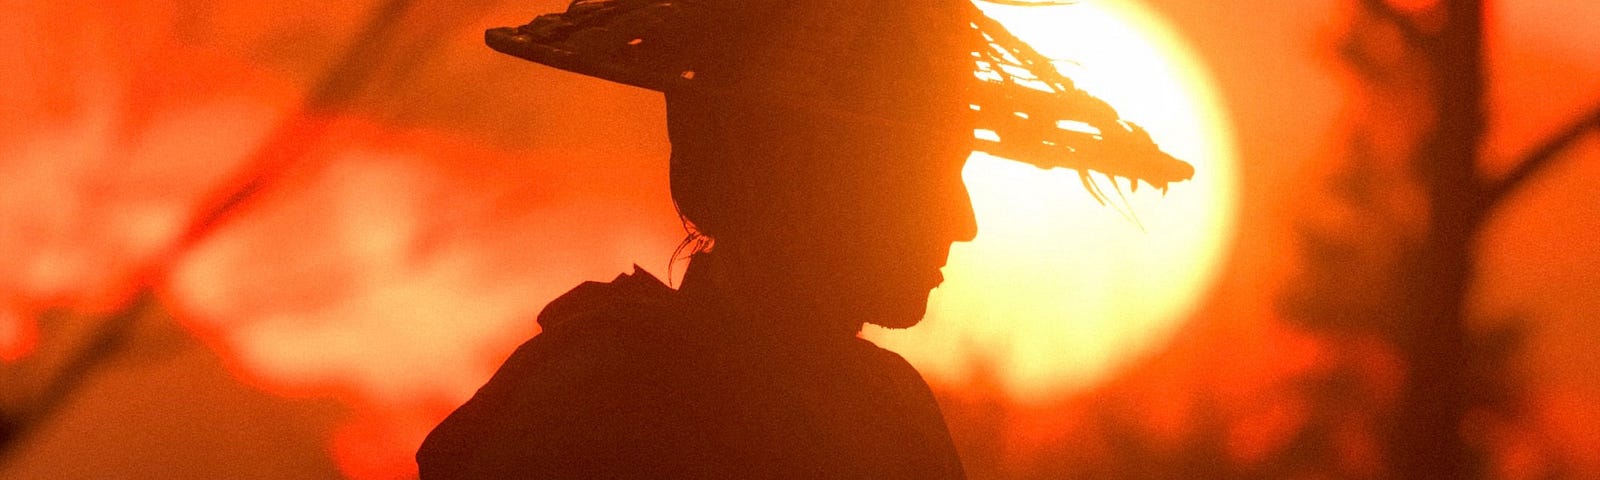 A silhouette of a samurai from side profile. He is wearing a conical straw hat. He stands in front of a setting sun. The whole picture is orange and brown.